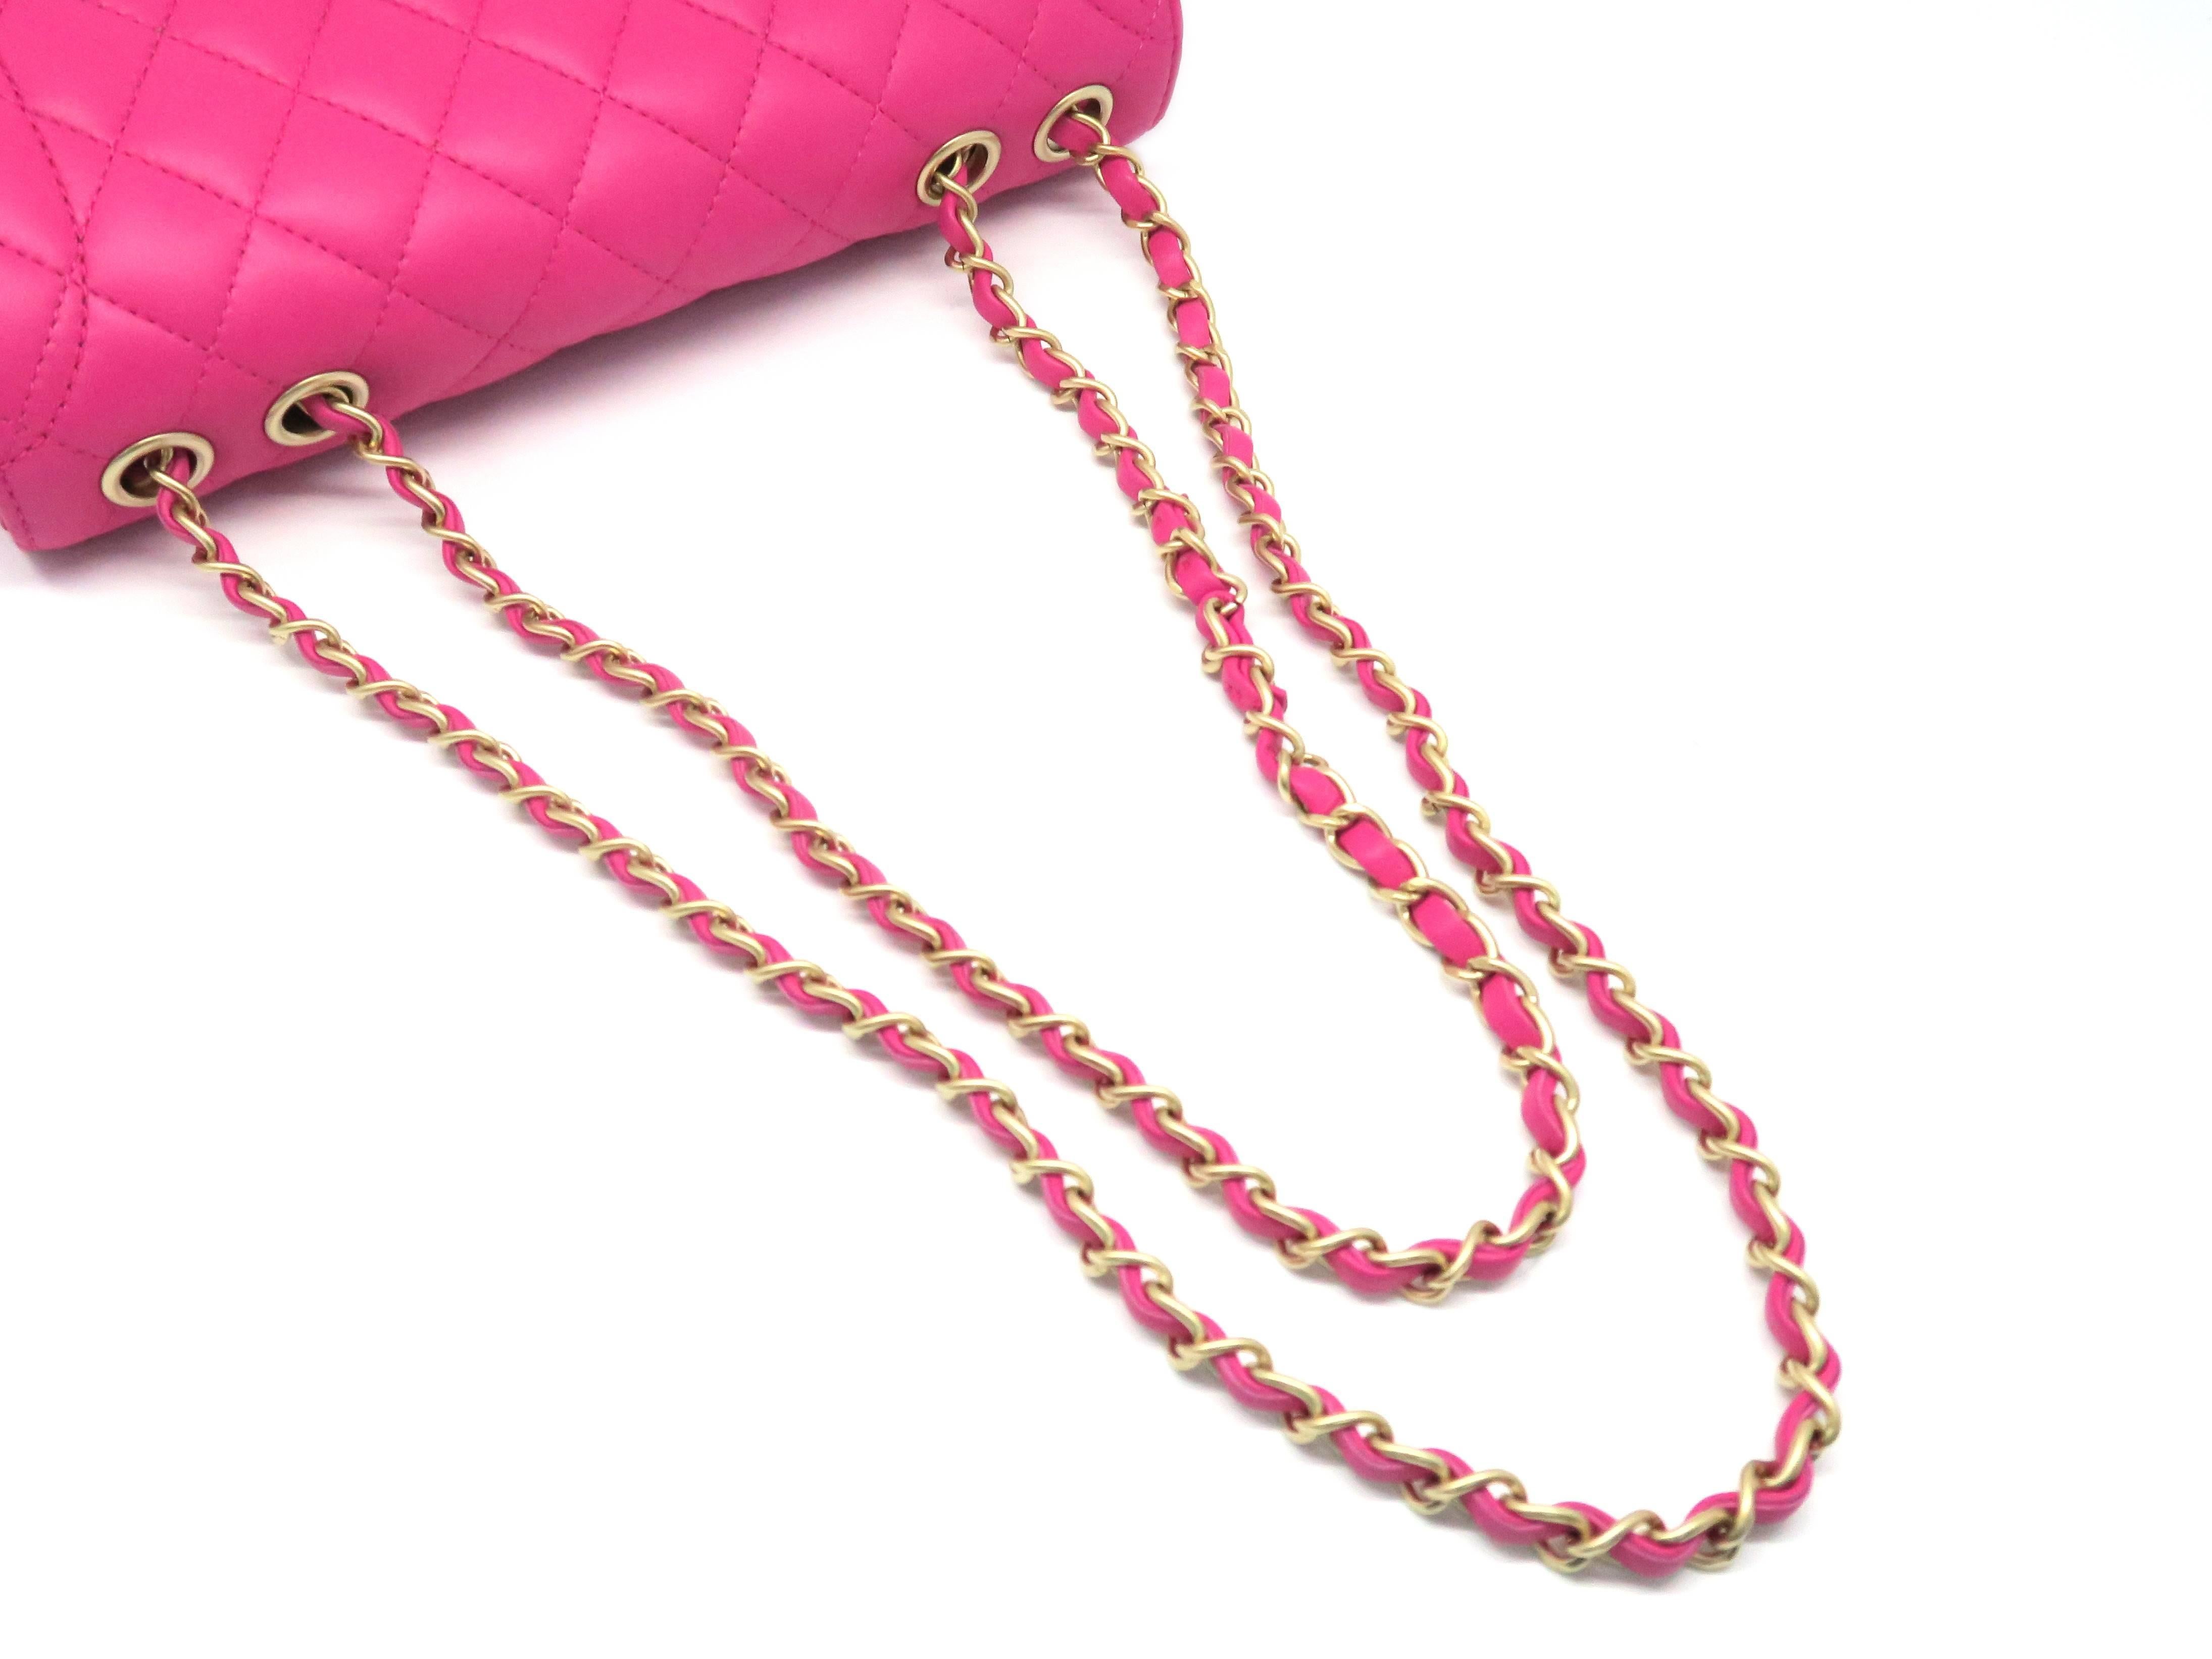 Chanel Fuchsia Quilted Lambskin Leather Gold Metal Chain Shoulder Flap Bag 2